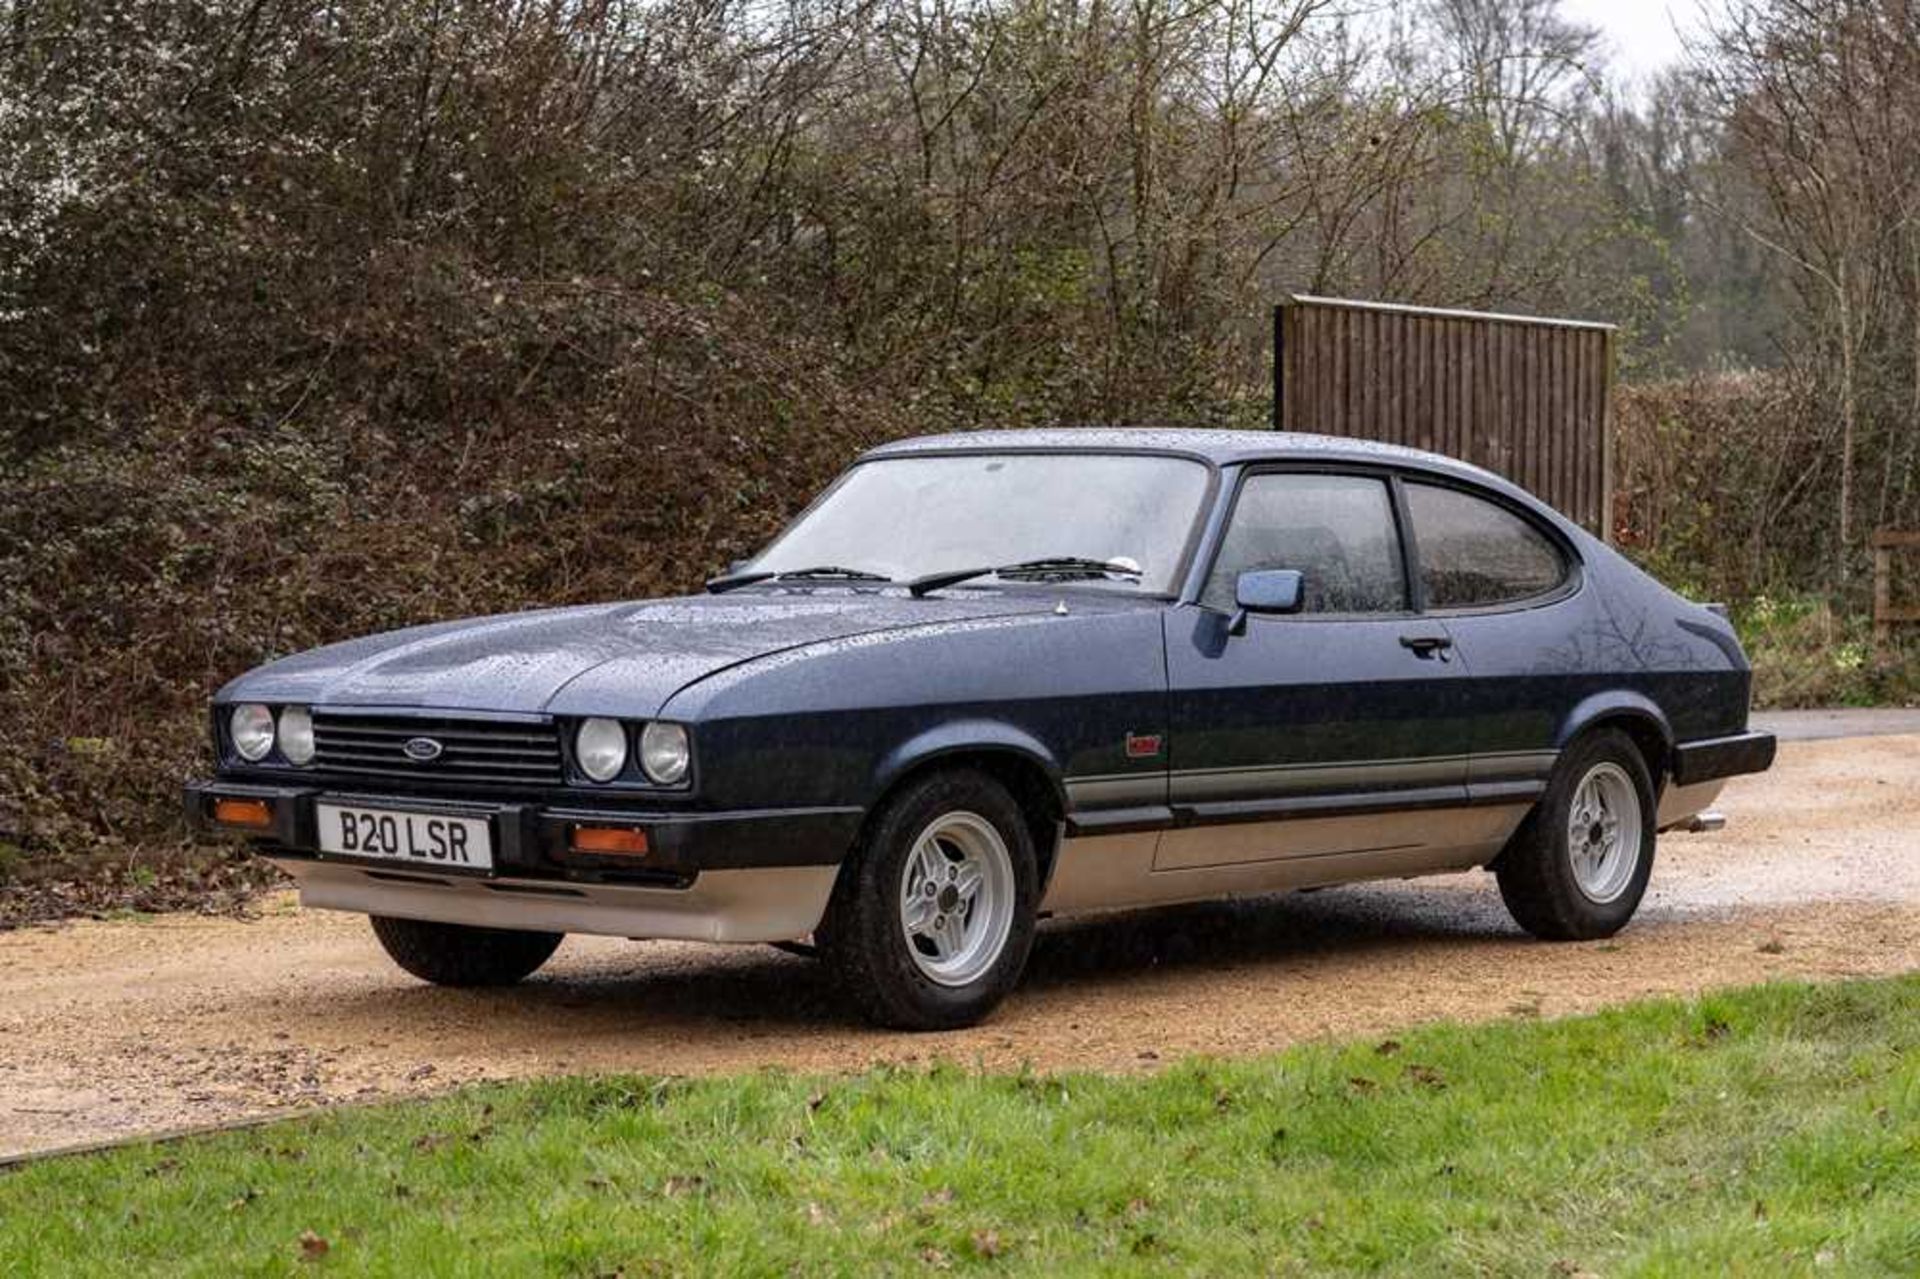 1985 Ford Capri Laser 2.0 Litre Warranted 55,300 miles from new - Image 12 of 67